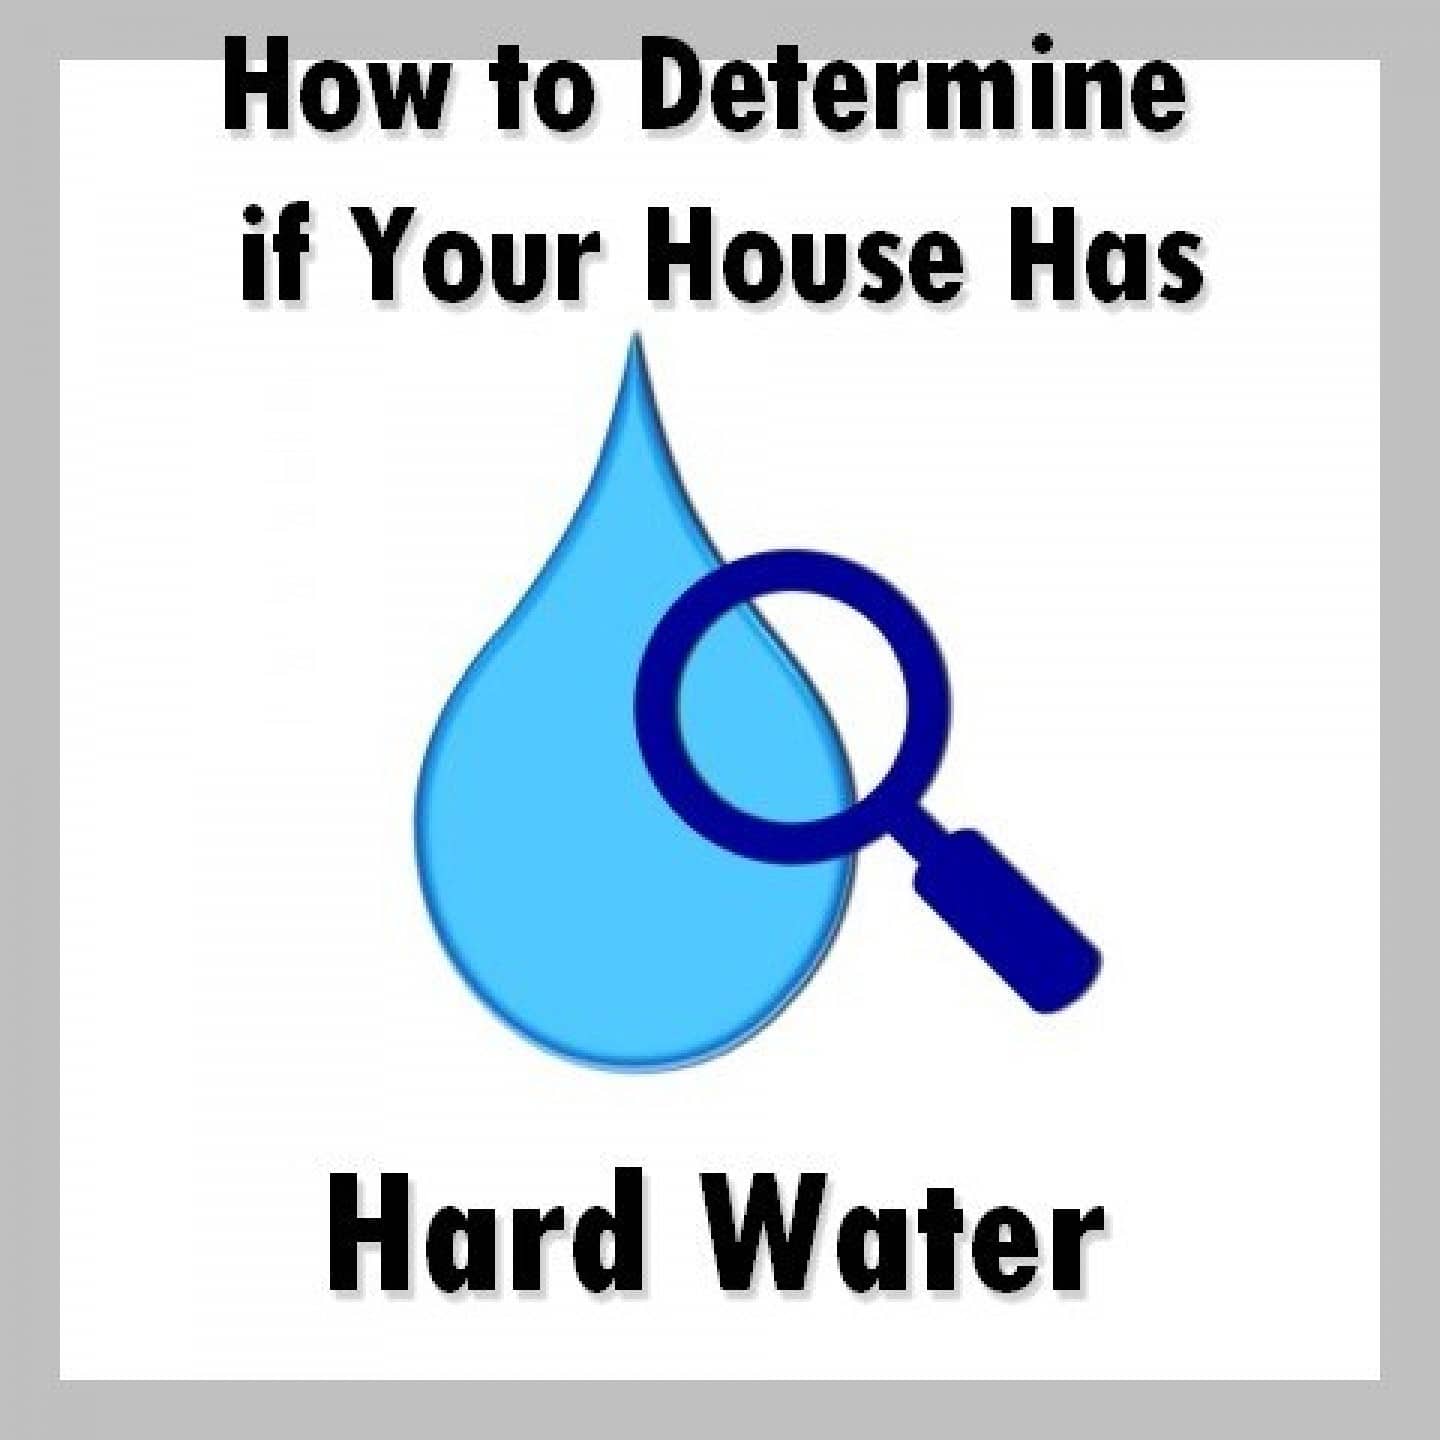 How to Determine if Your House has hard water